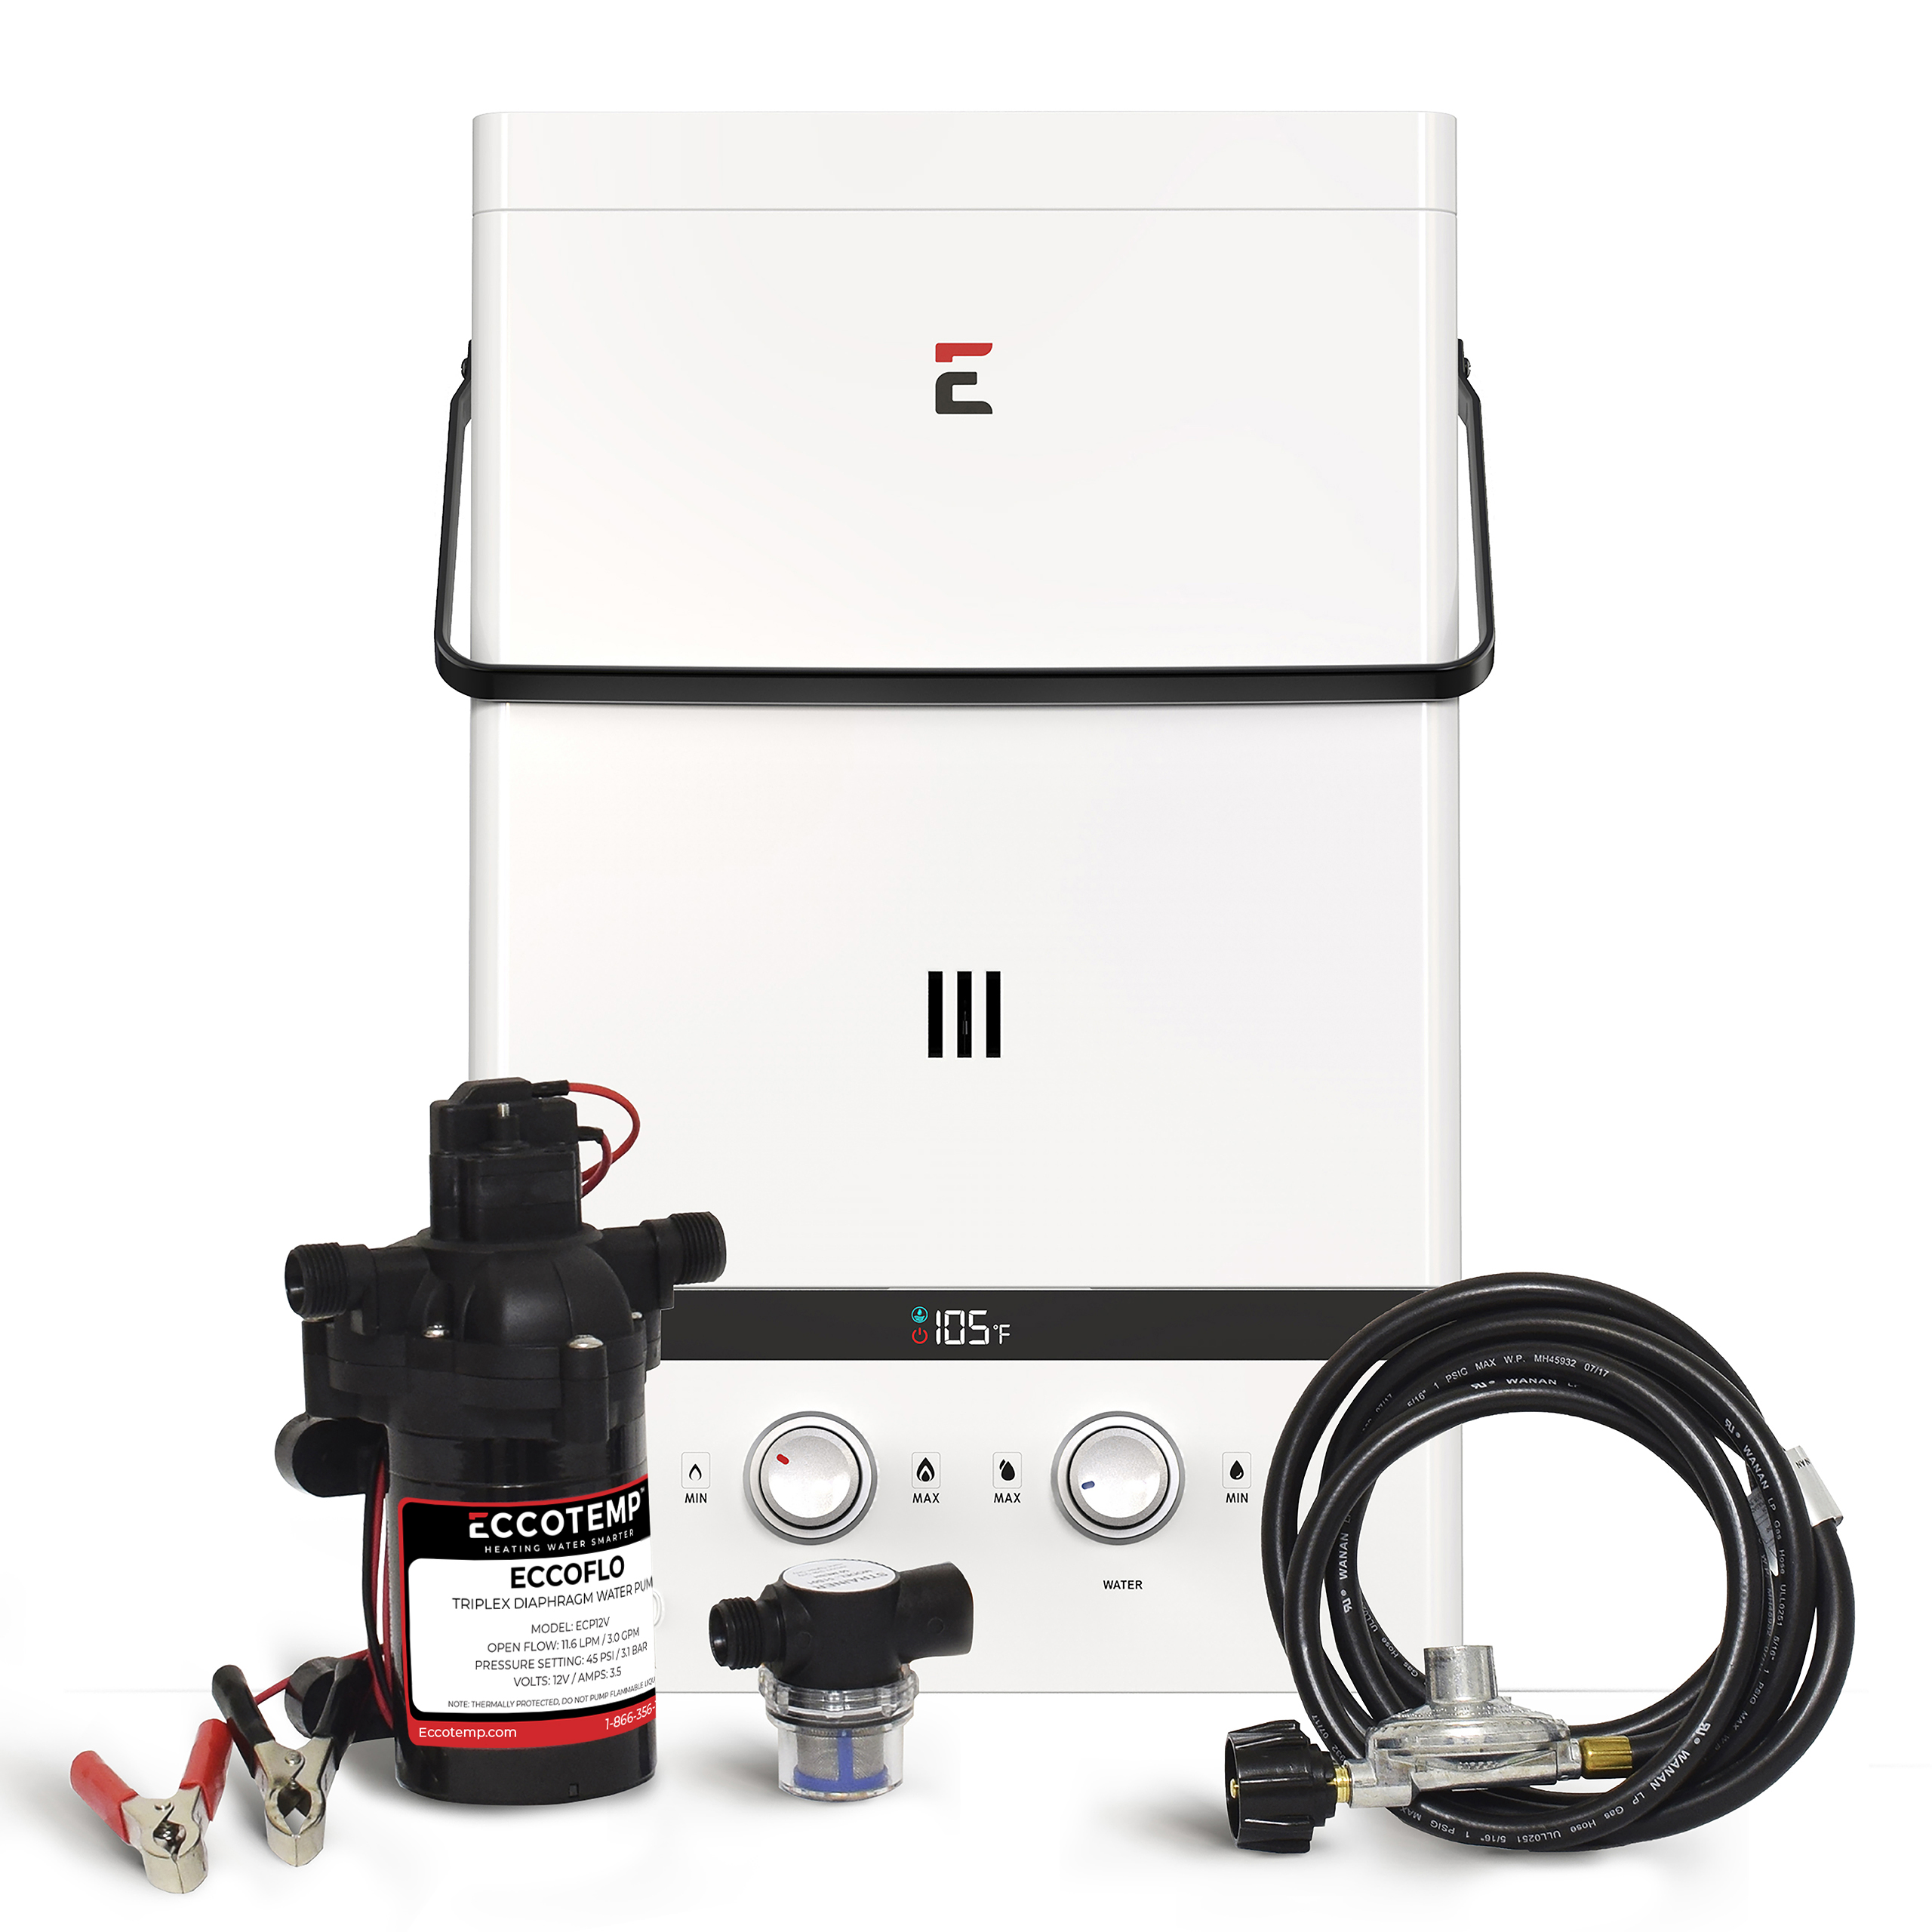 Eccotemp Luxe 3.0 GPM Portable Outdoor Tankless Water Heater with EccoFlo Diaphragm 12V Pump and Strainer